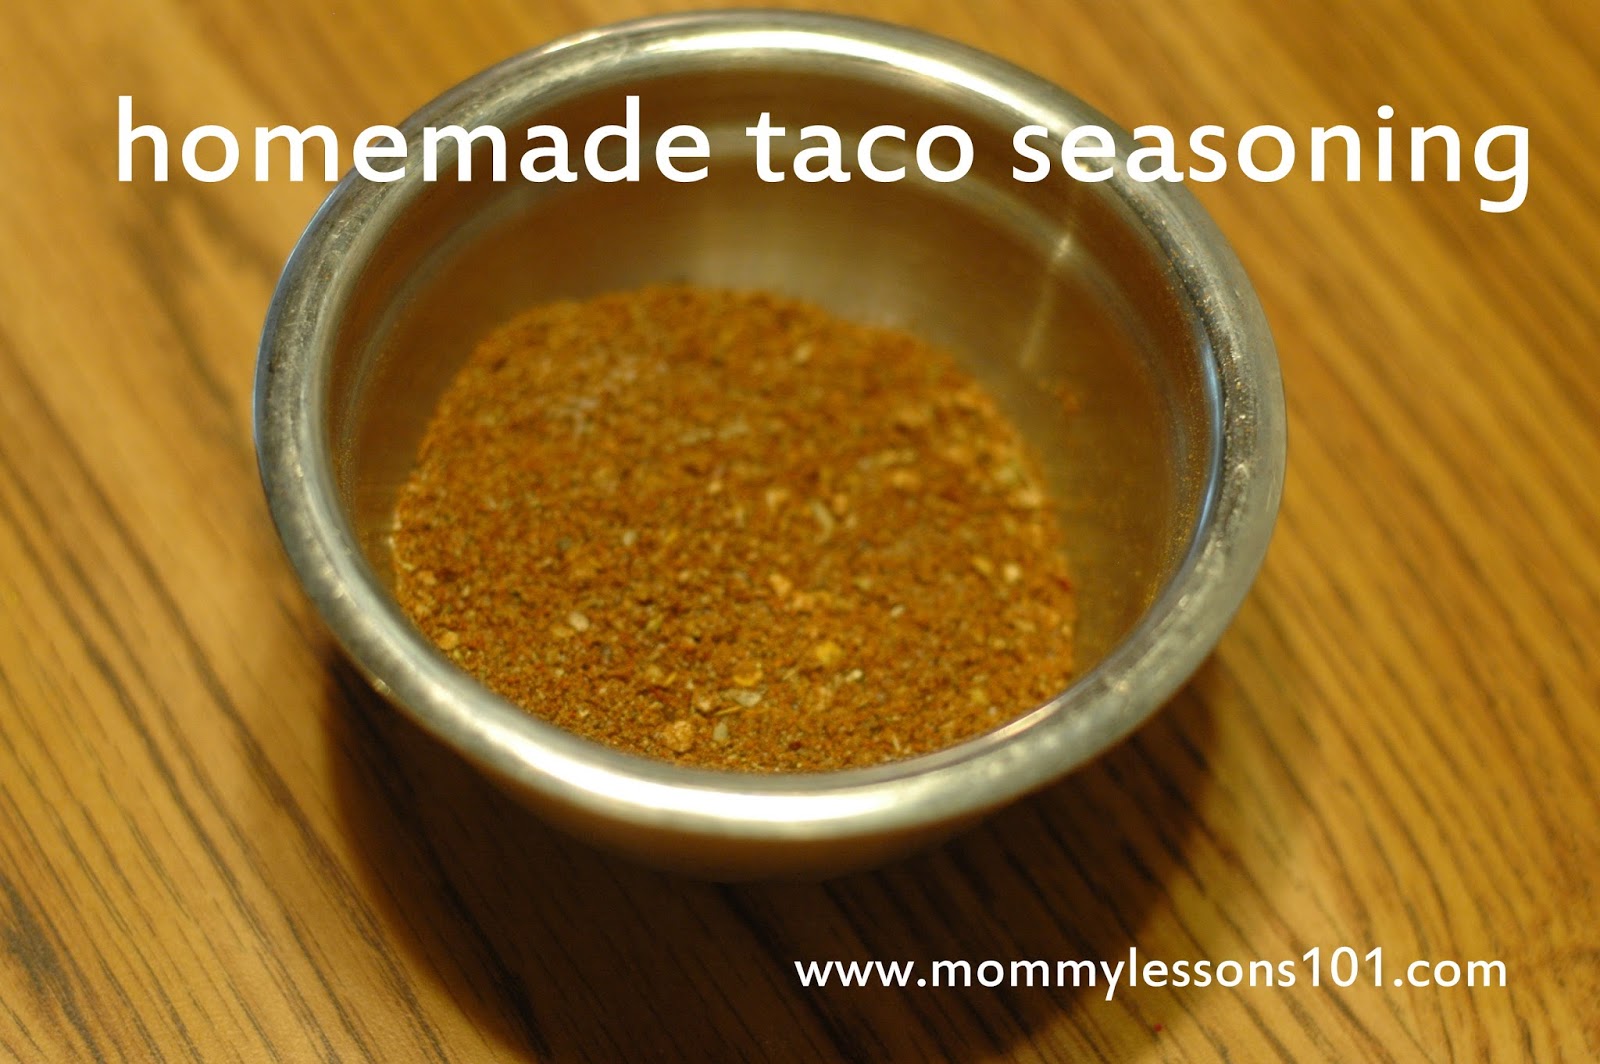 Mommy Lessons 101: Homemade Taco Seasoning 1 Ounce Of Taco Seasoning Is How Many Tablespoons